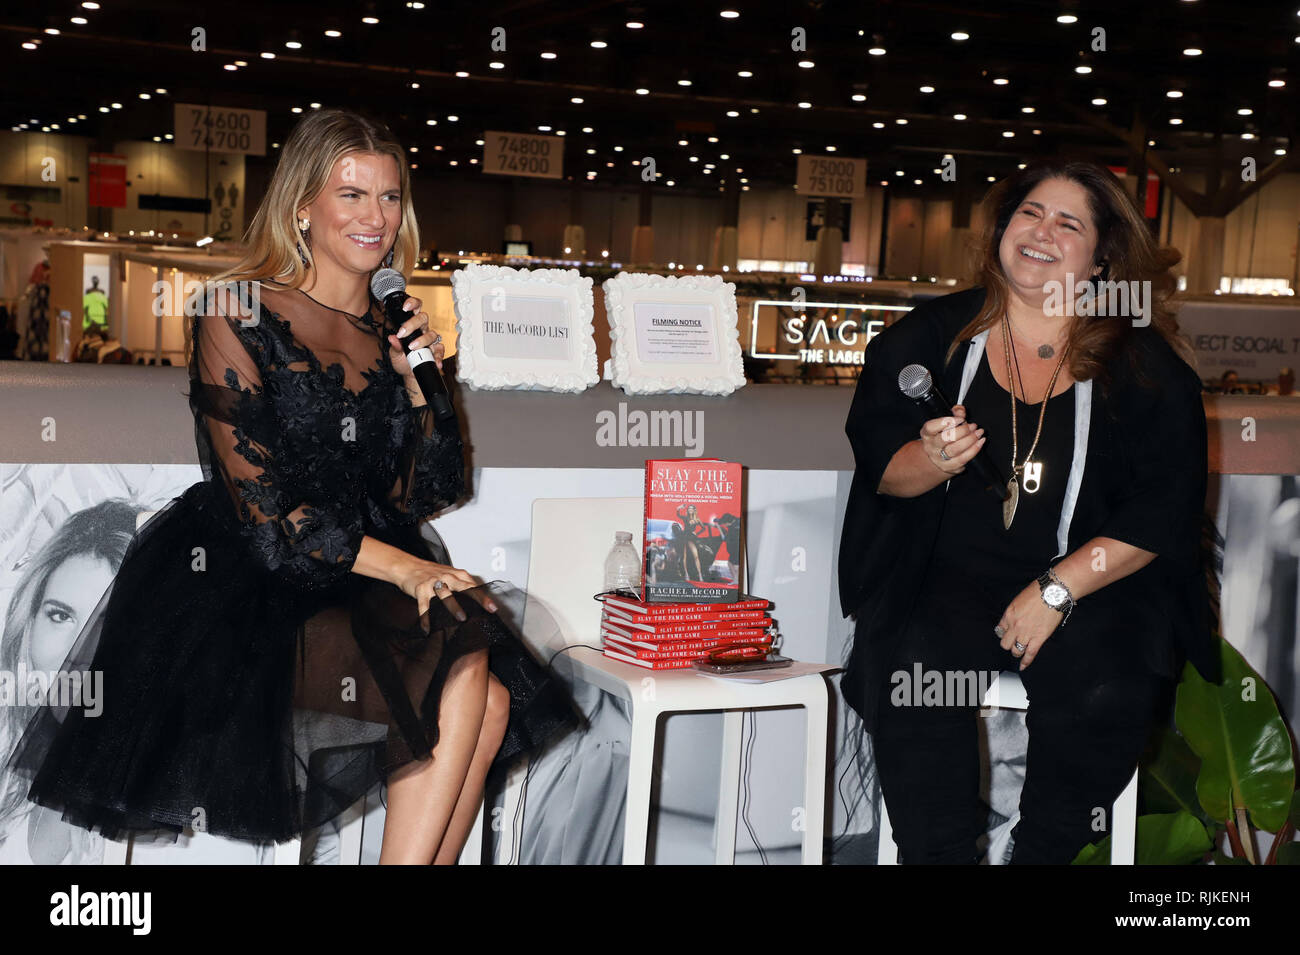 Las Vegas, Nevada, USA. 6th February, 2019. RACHEL MCCORD And RAVEN SYMONE  Appearance In The WWD Social House Magic Convention Las Vegas Convention  Center Las Vegas, Nv February 6, 2019 Credit: ENT/Alamy